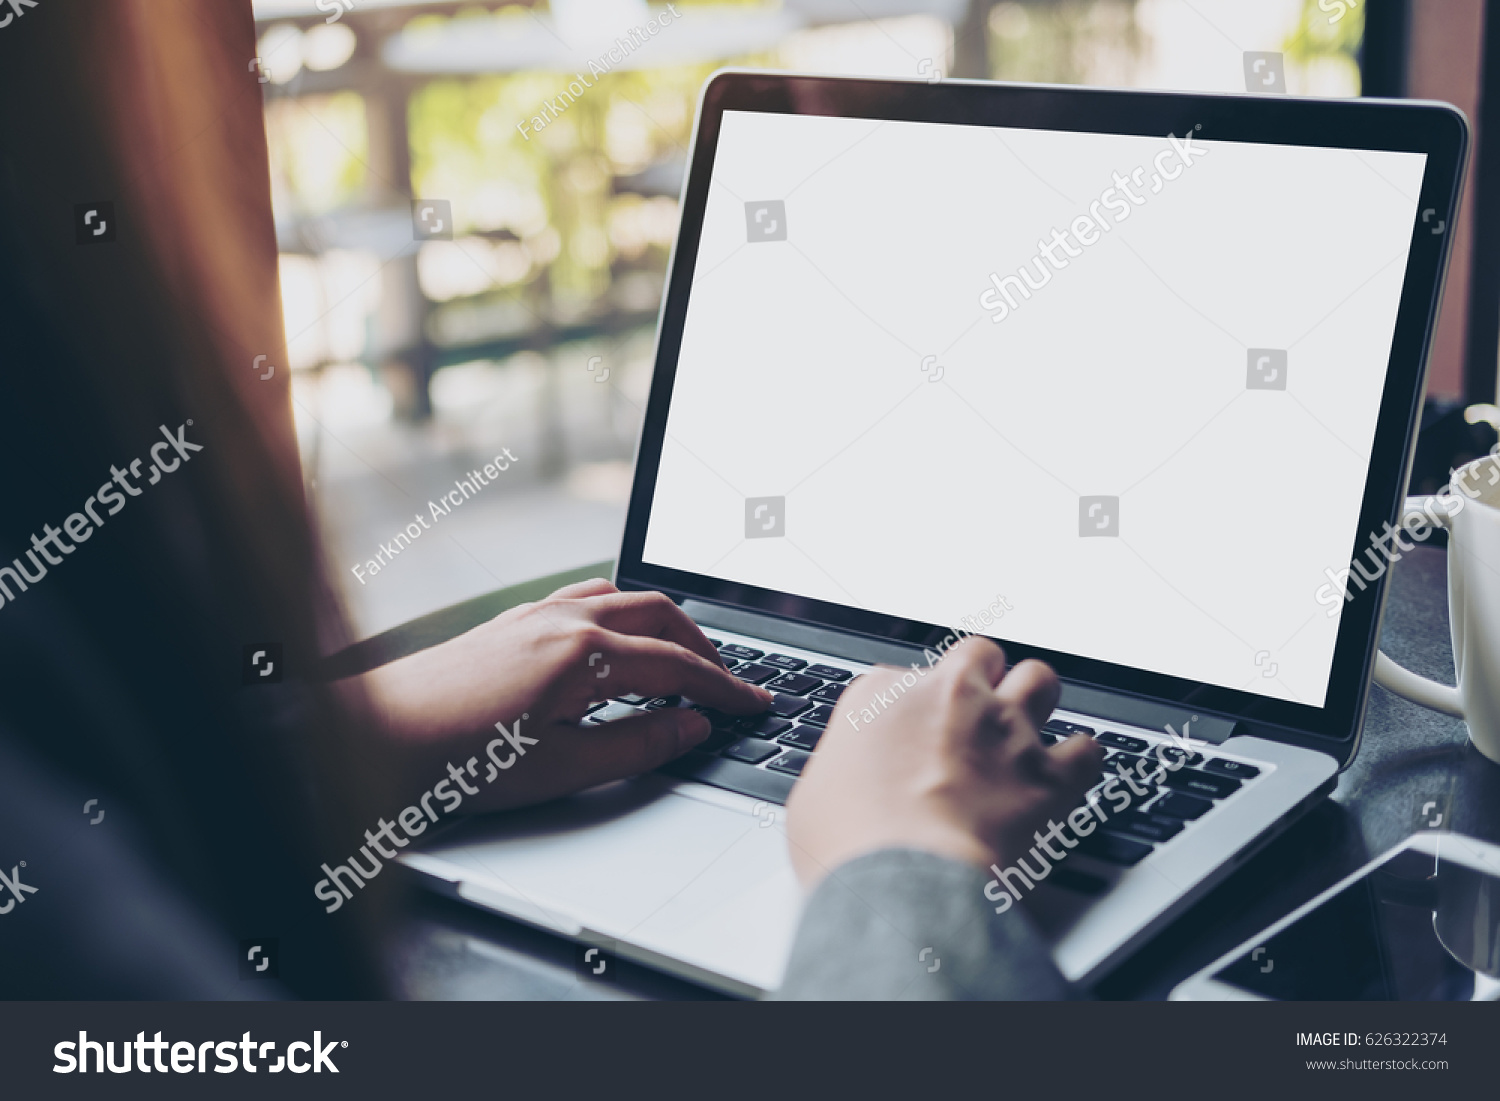 Mockup image of business woman using and typing on laptop with blank white screen and coffee cup on glass table in modern loft cafe #626322374